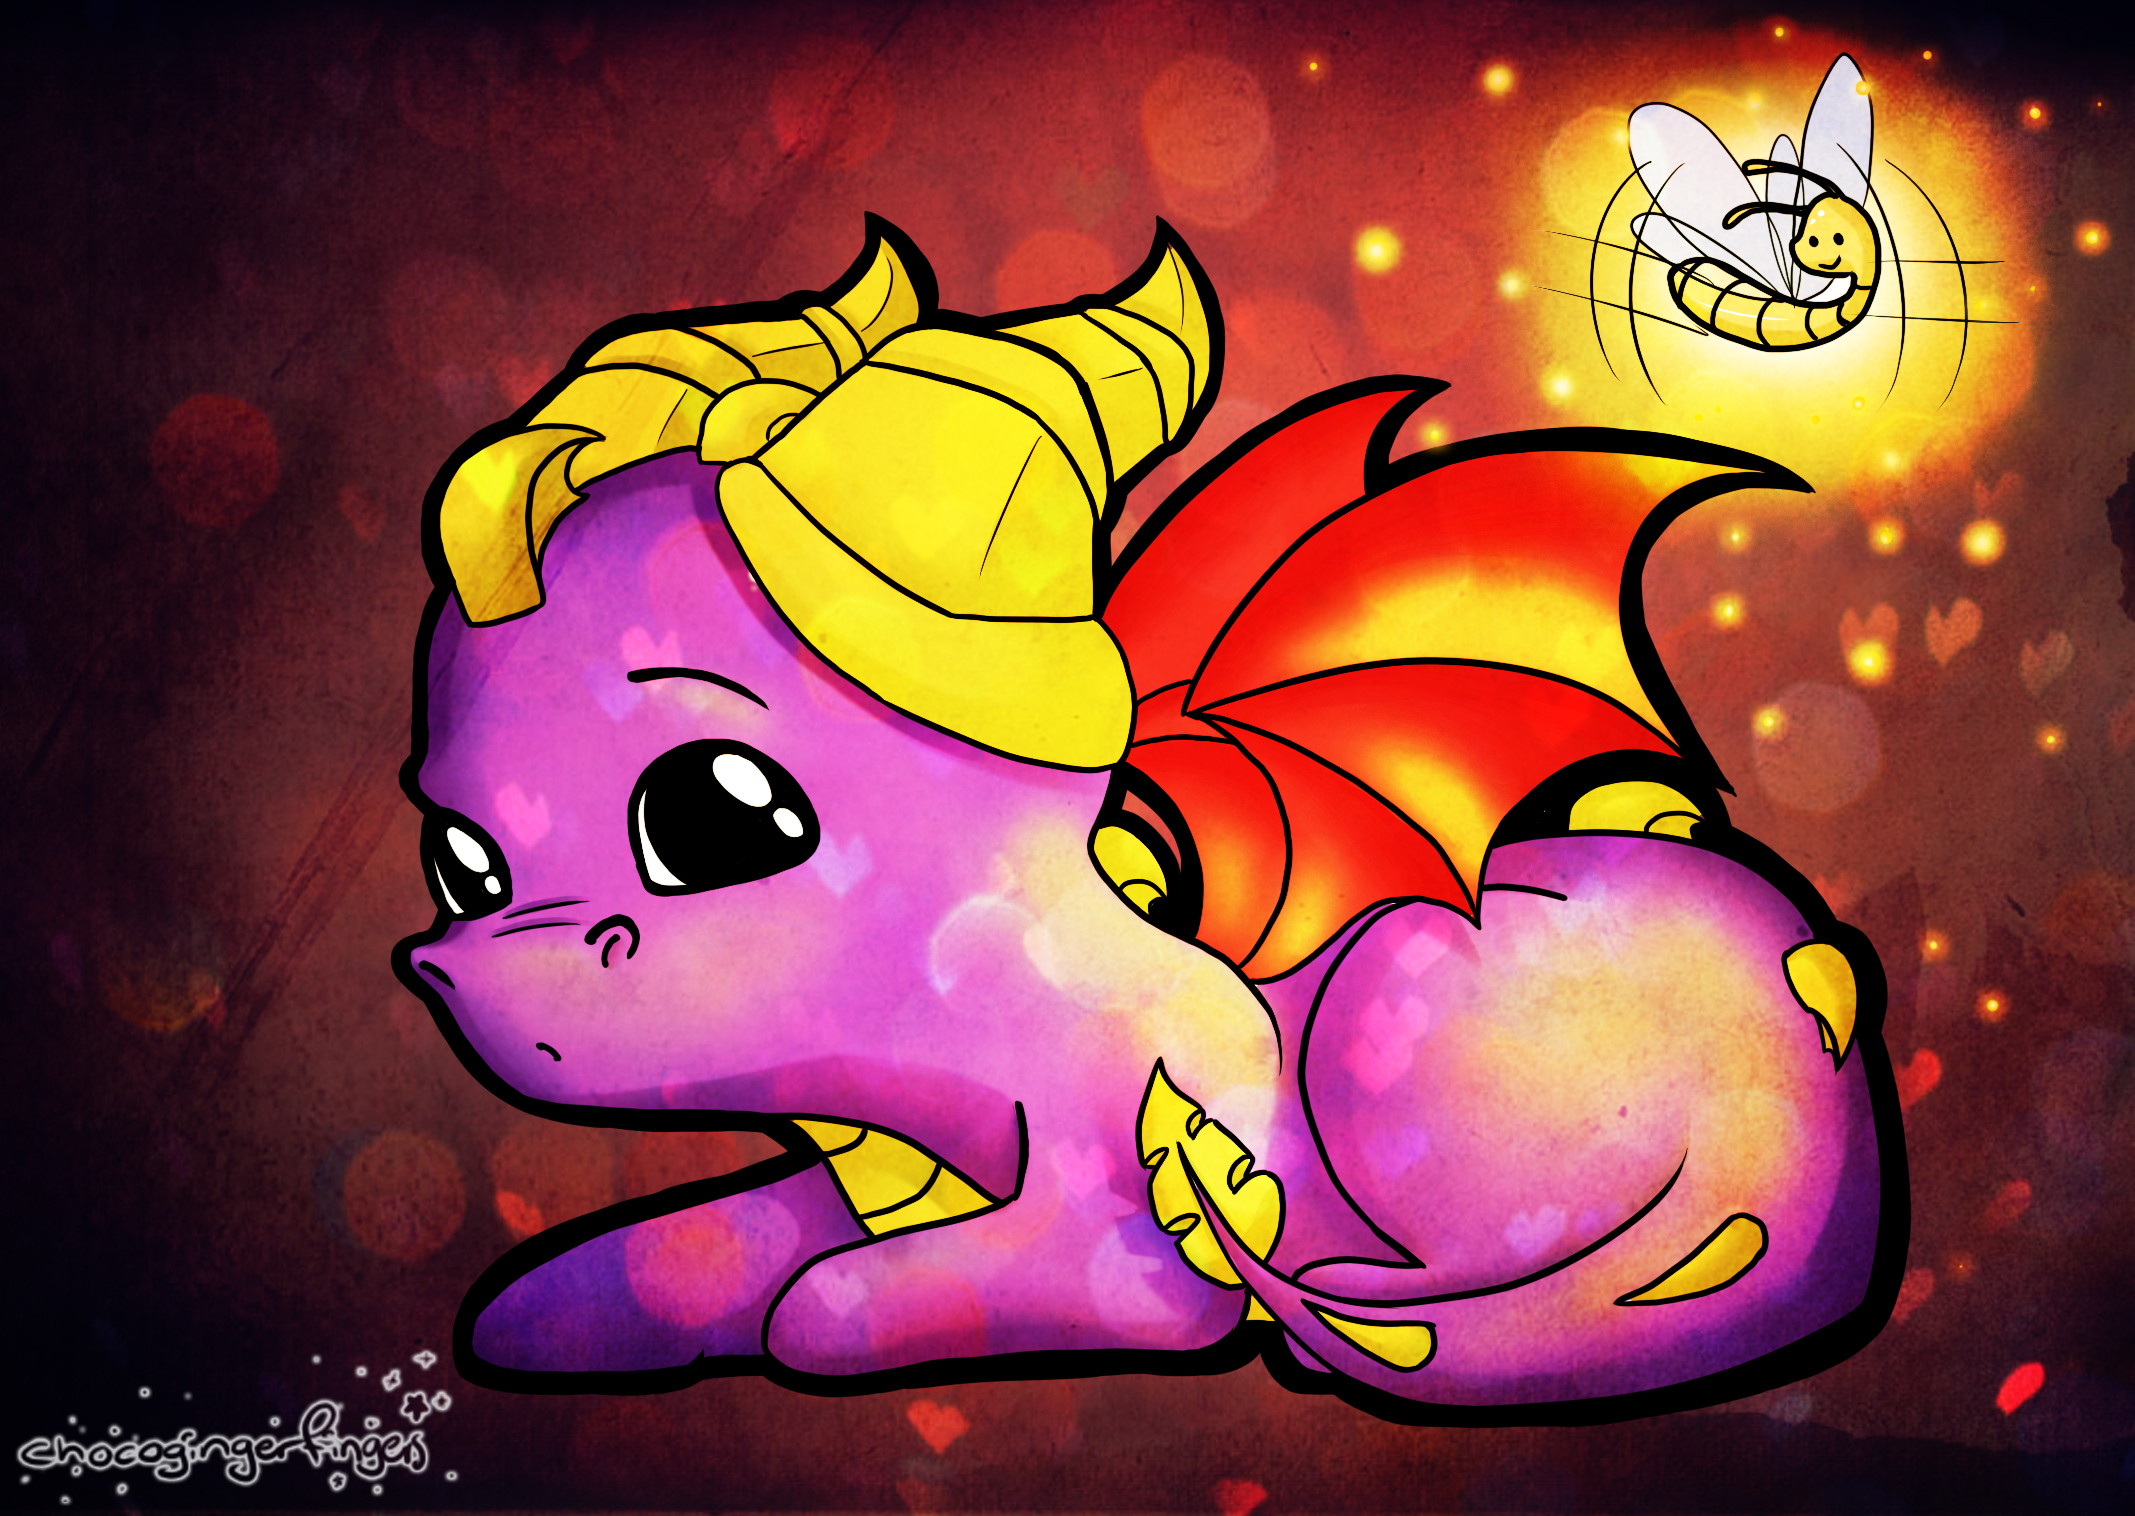 Spyro and Sparx by chocogingerfingers